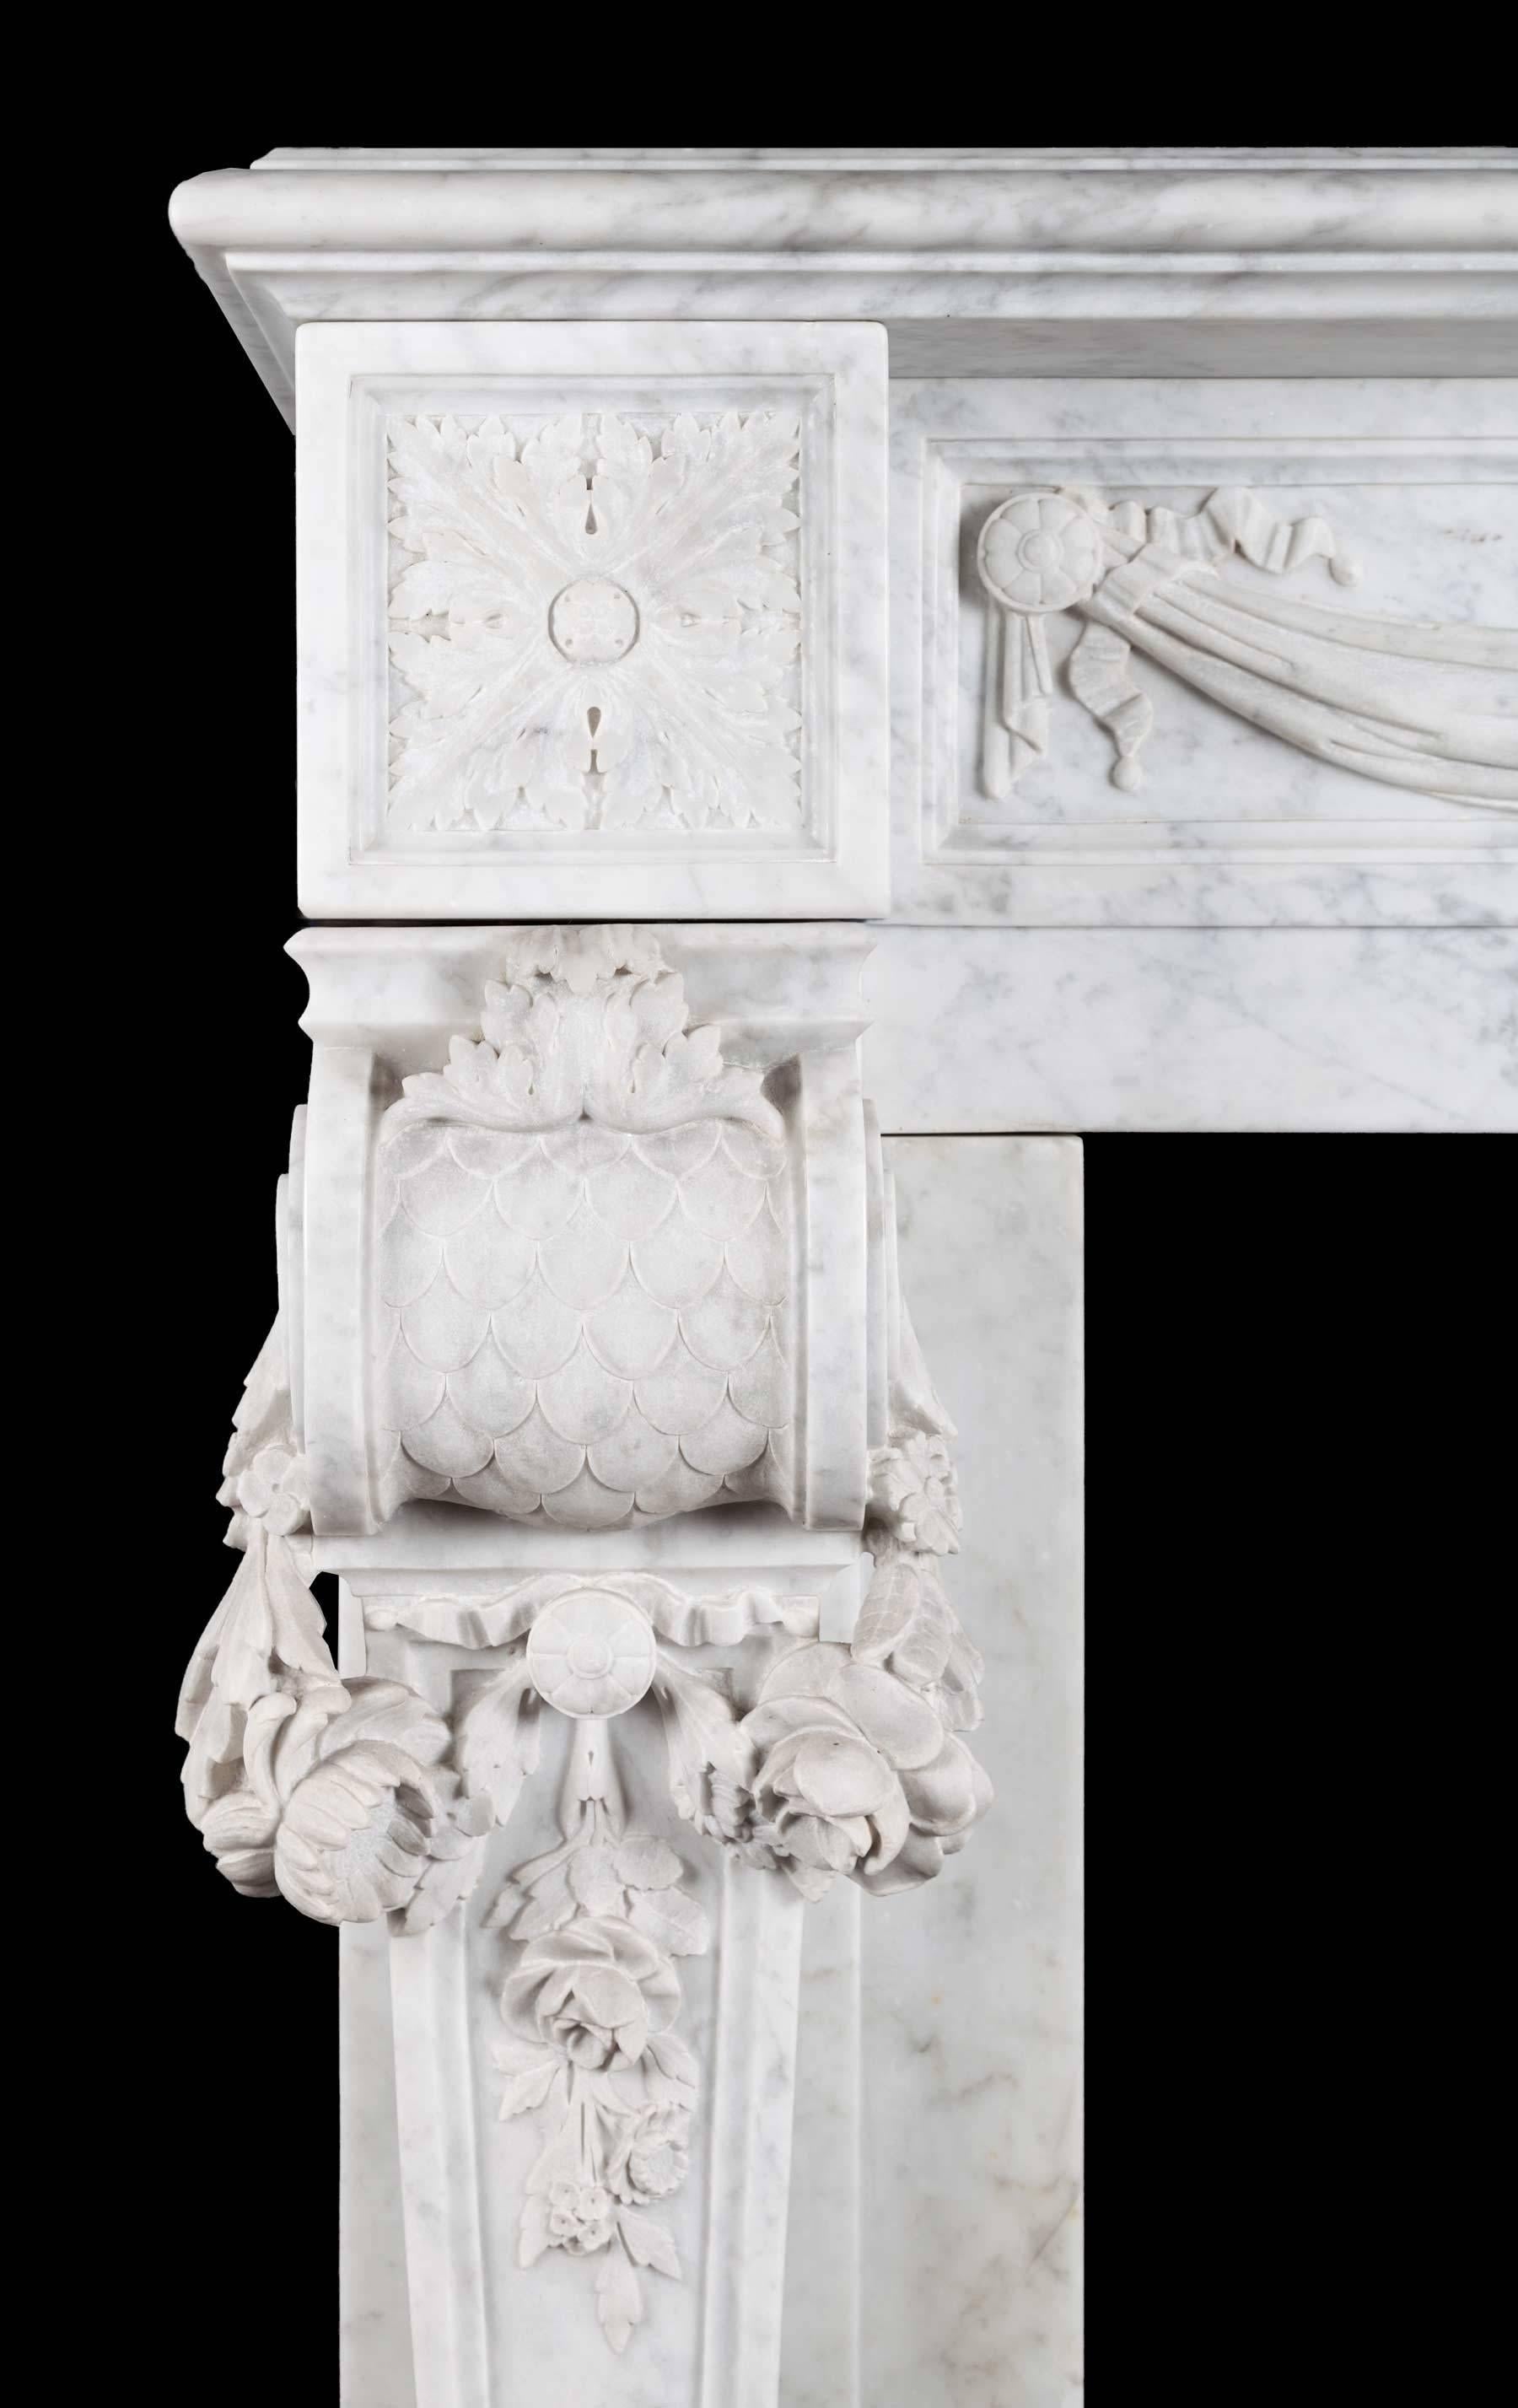 An antique French Carrara marble mantelpiece in the Louis XVI style. The swags of drapes frieze, centered by a plaque that is carved with a classical urn and arabesques. The square foliate paterae corner blocks rest on console jambs, which are